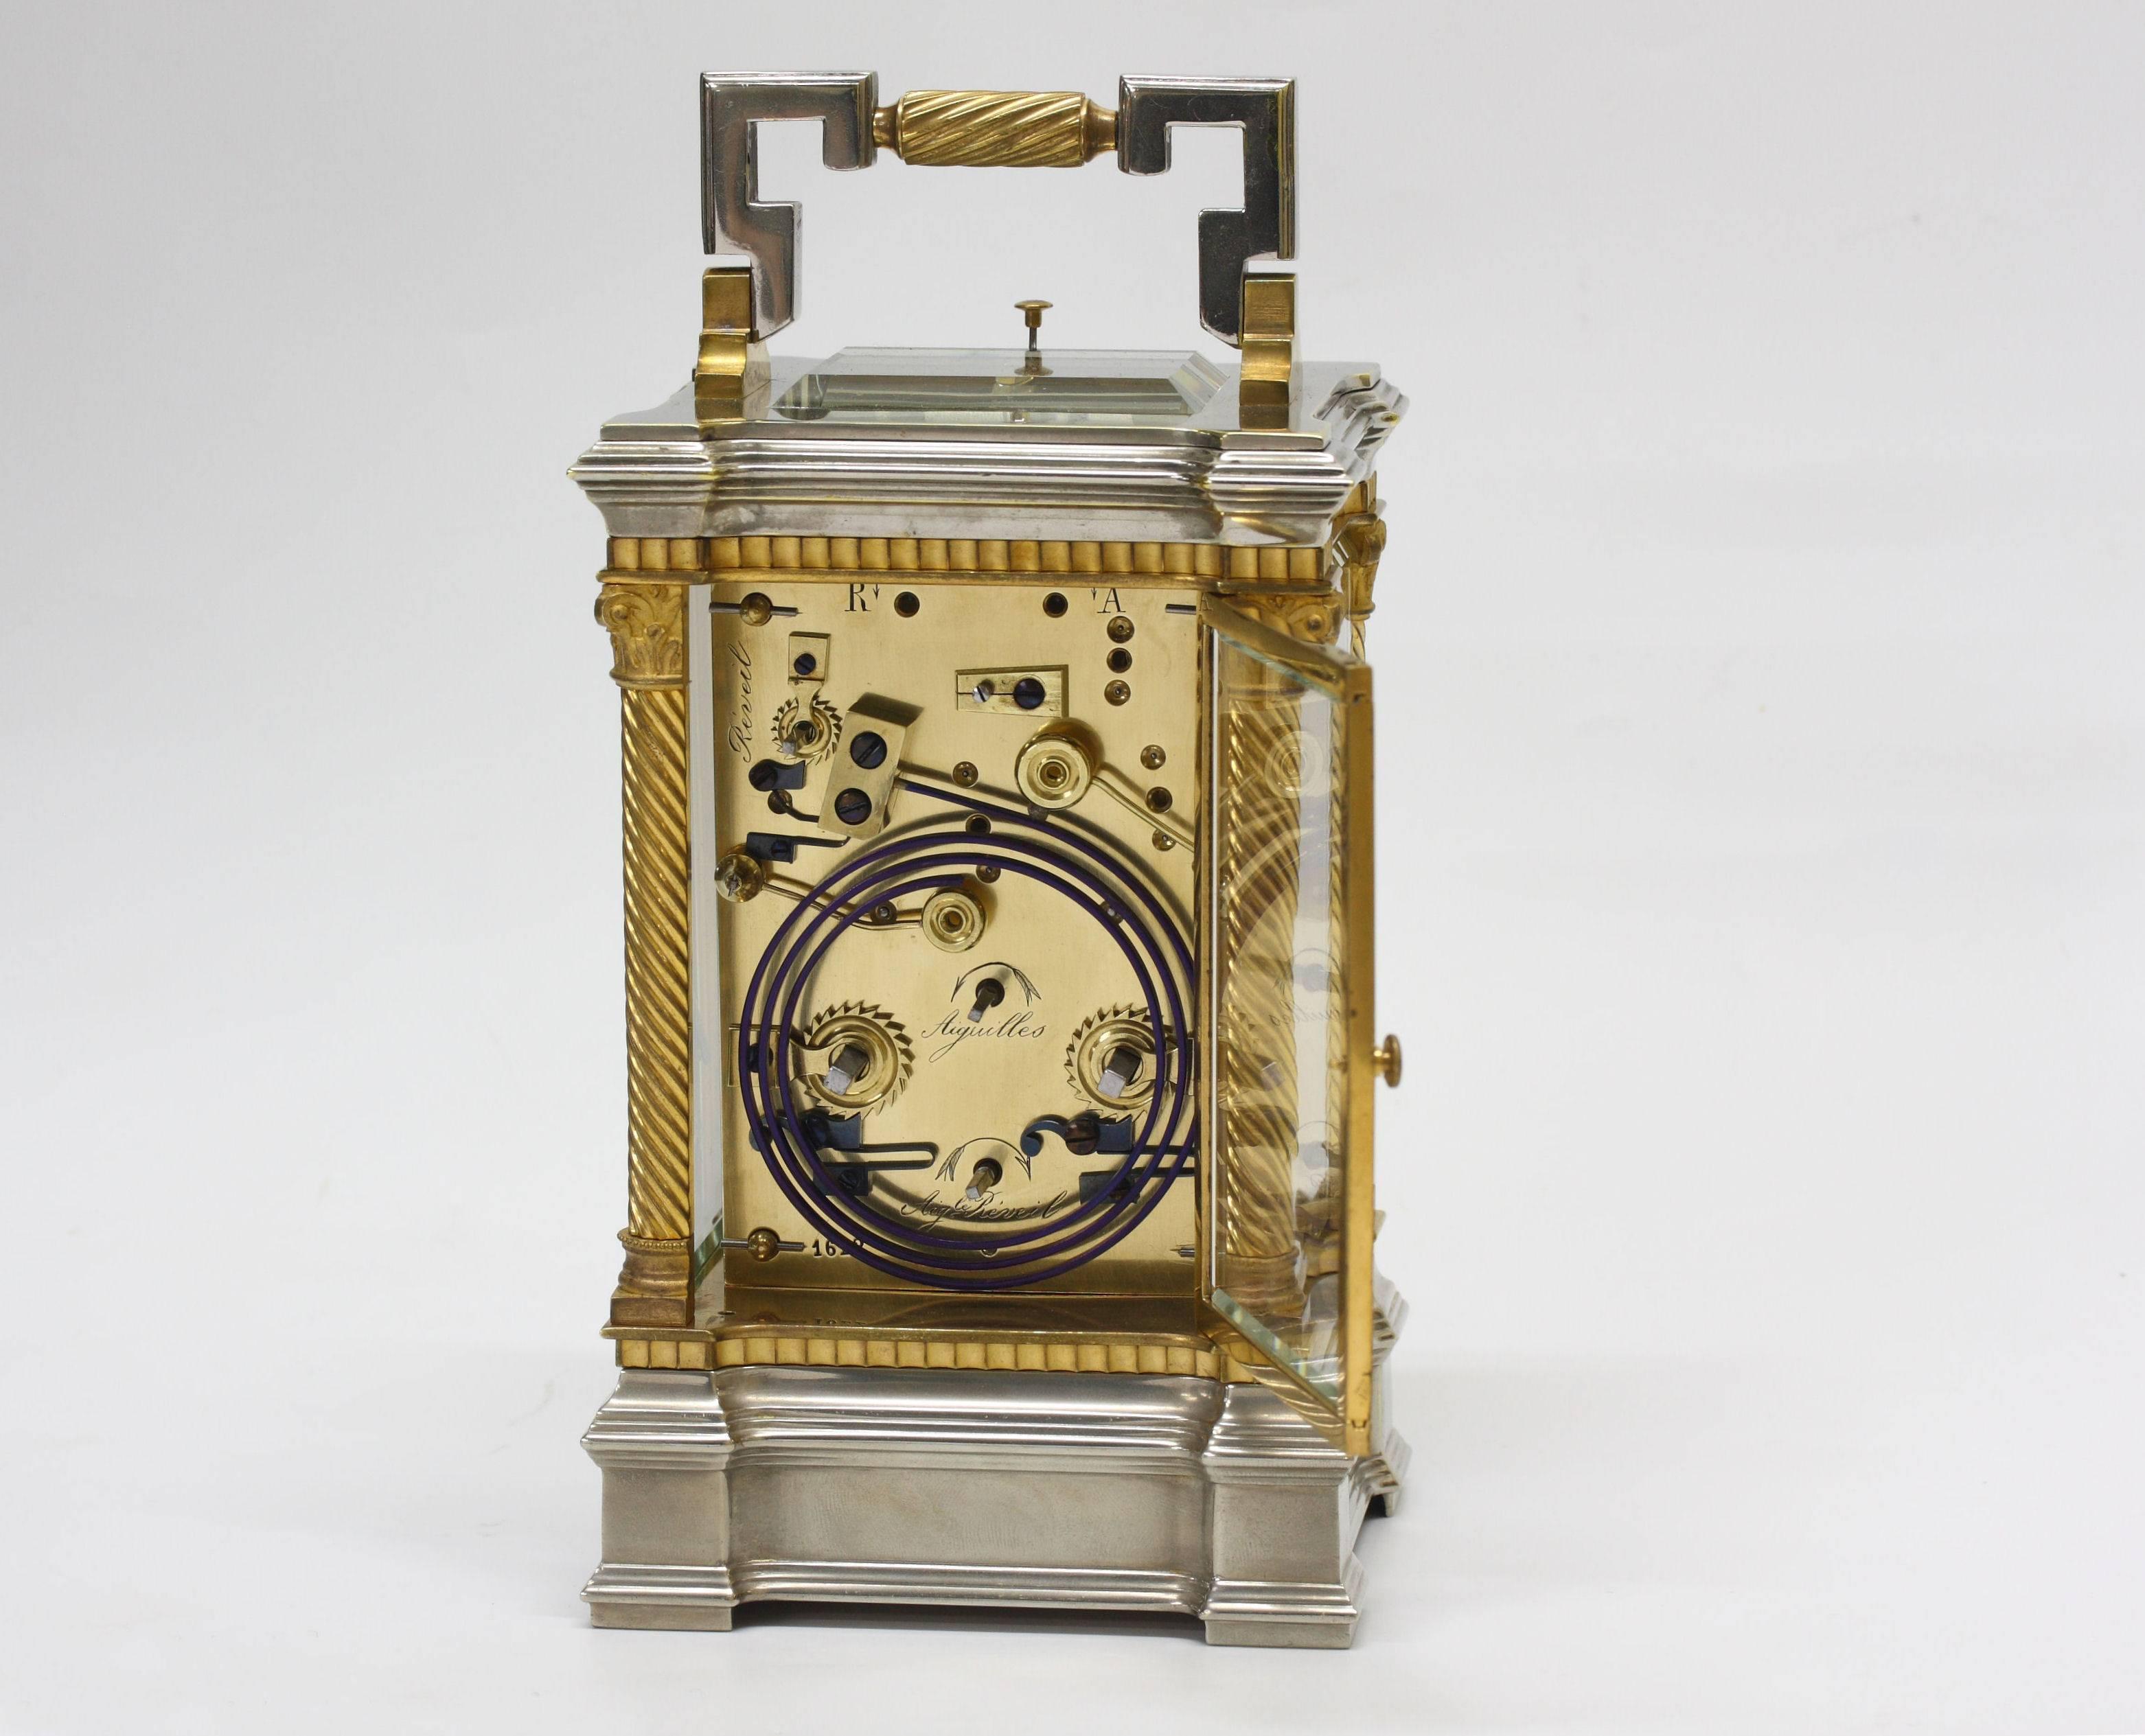 Classical Greek Ormolu and Nickeled Carriage Clock, Charles Oudin Palais-Royal